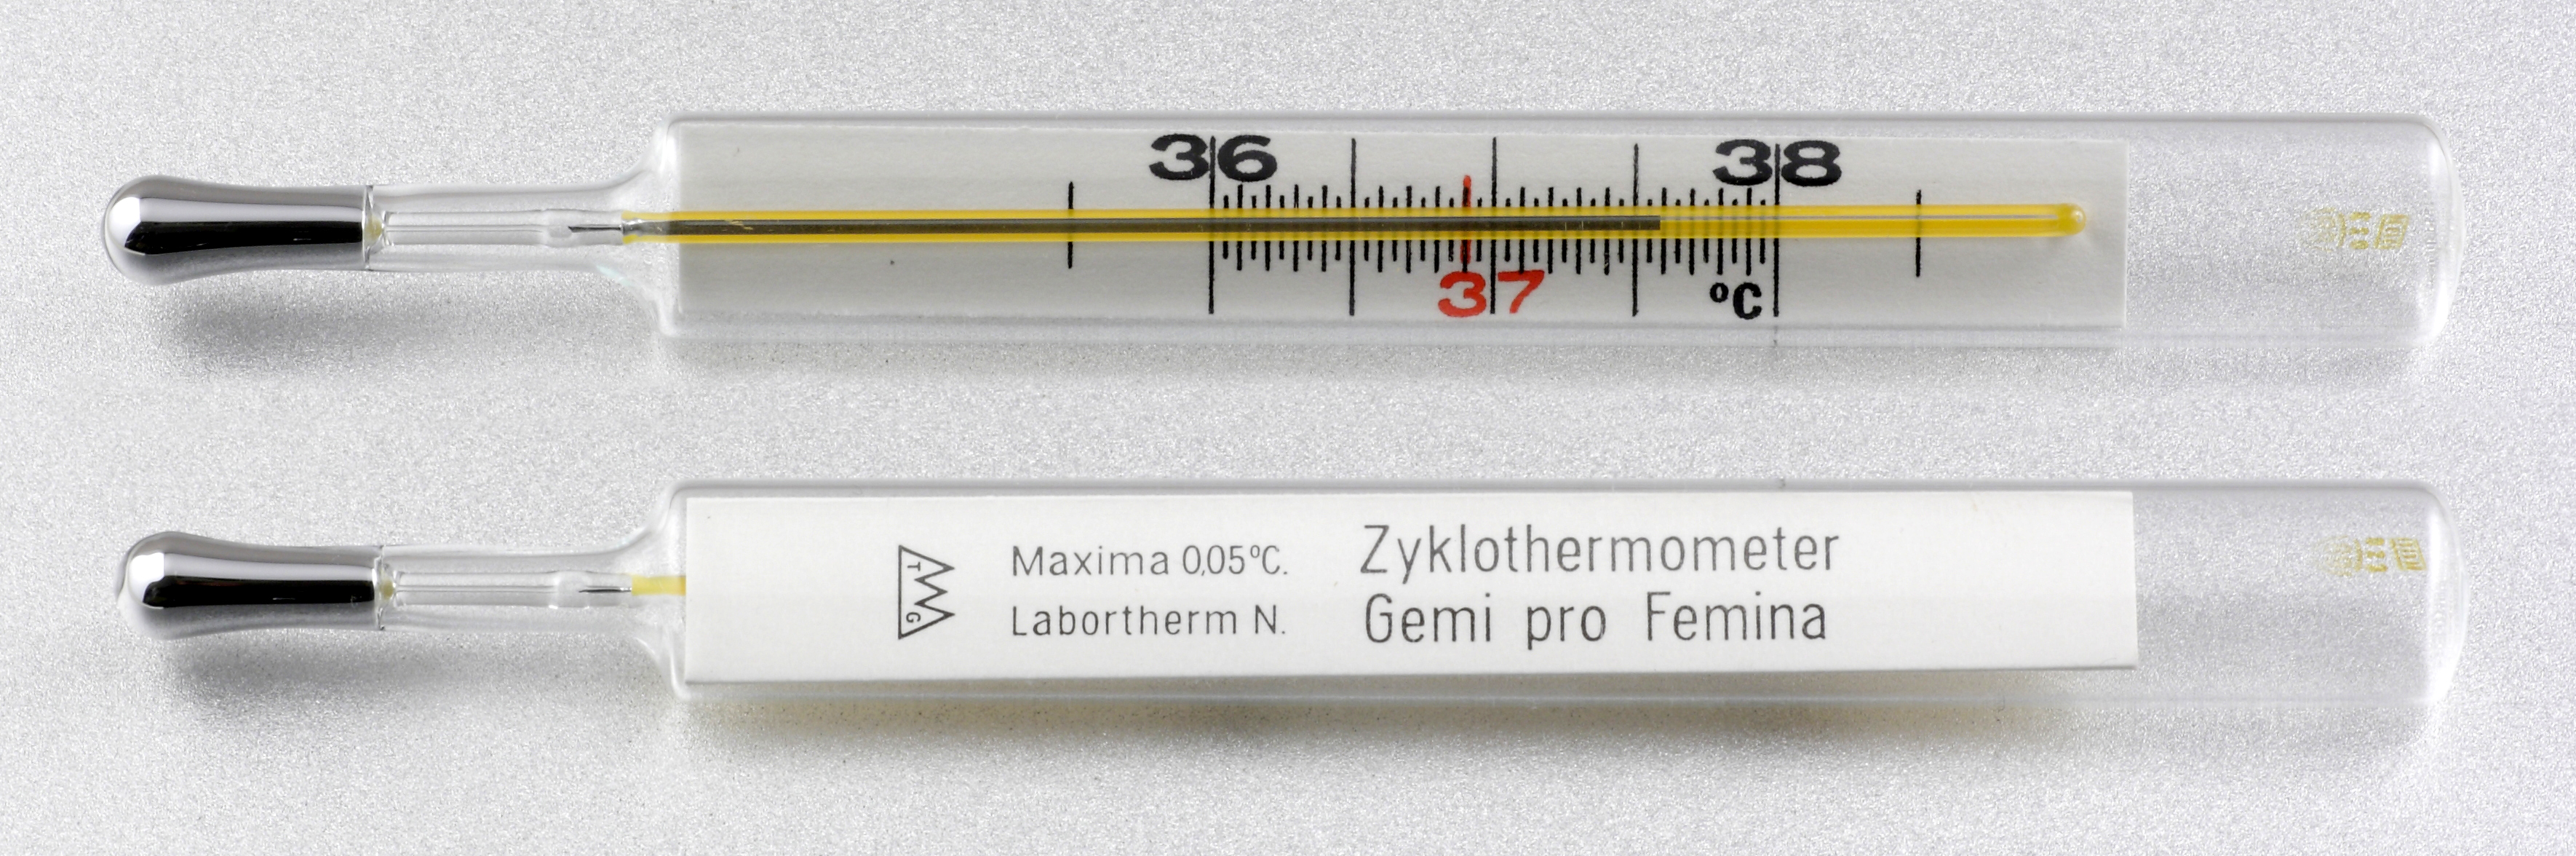 https://upload.wikimedia.org/wikipedia/commons/1/1d/Quecksilber-Basalthermometer.jpg